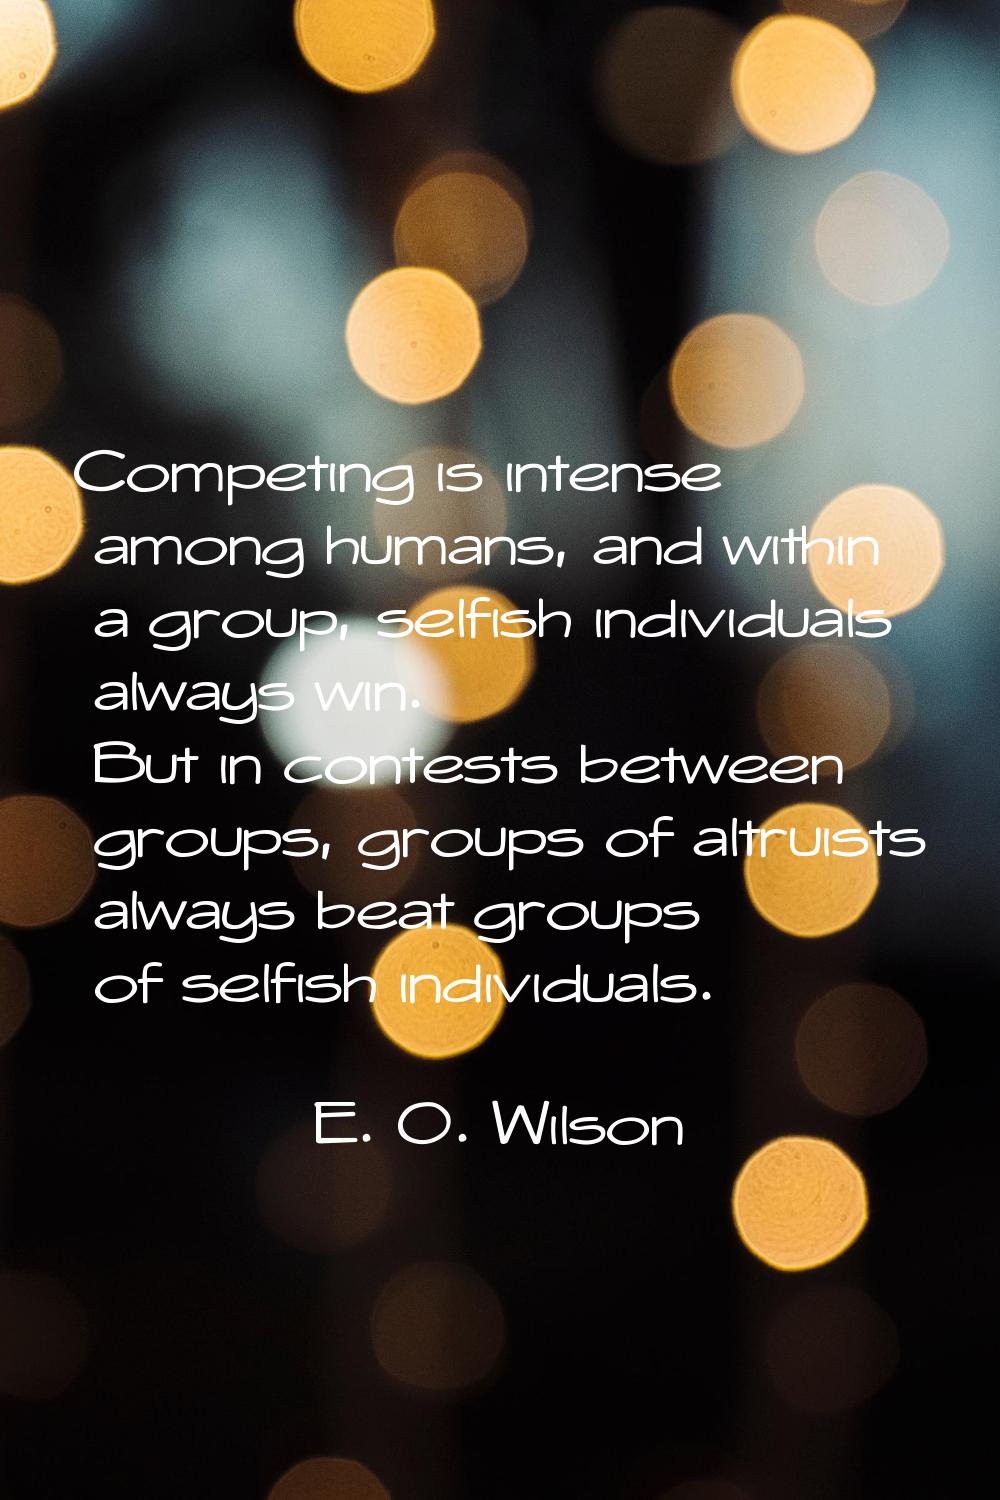 Competing is intense among humans, and within a group, selfish individuals always win. But in conte